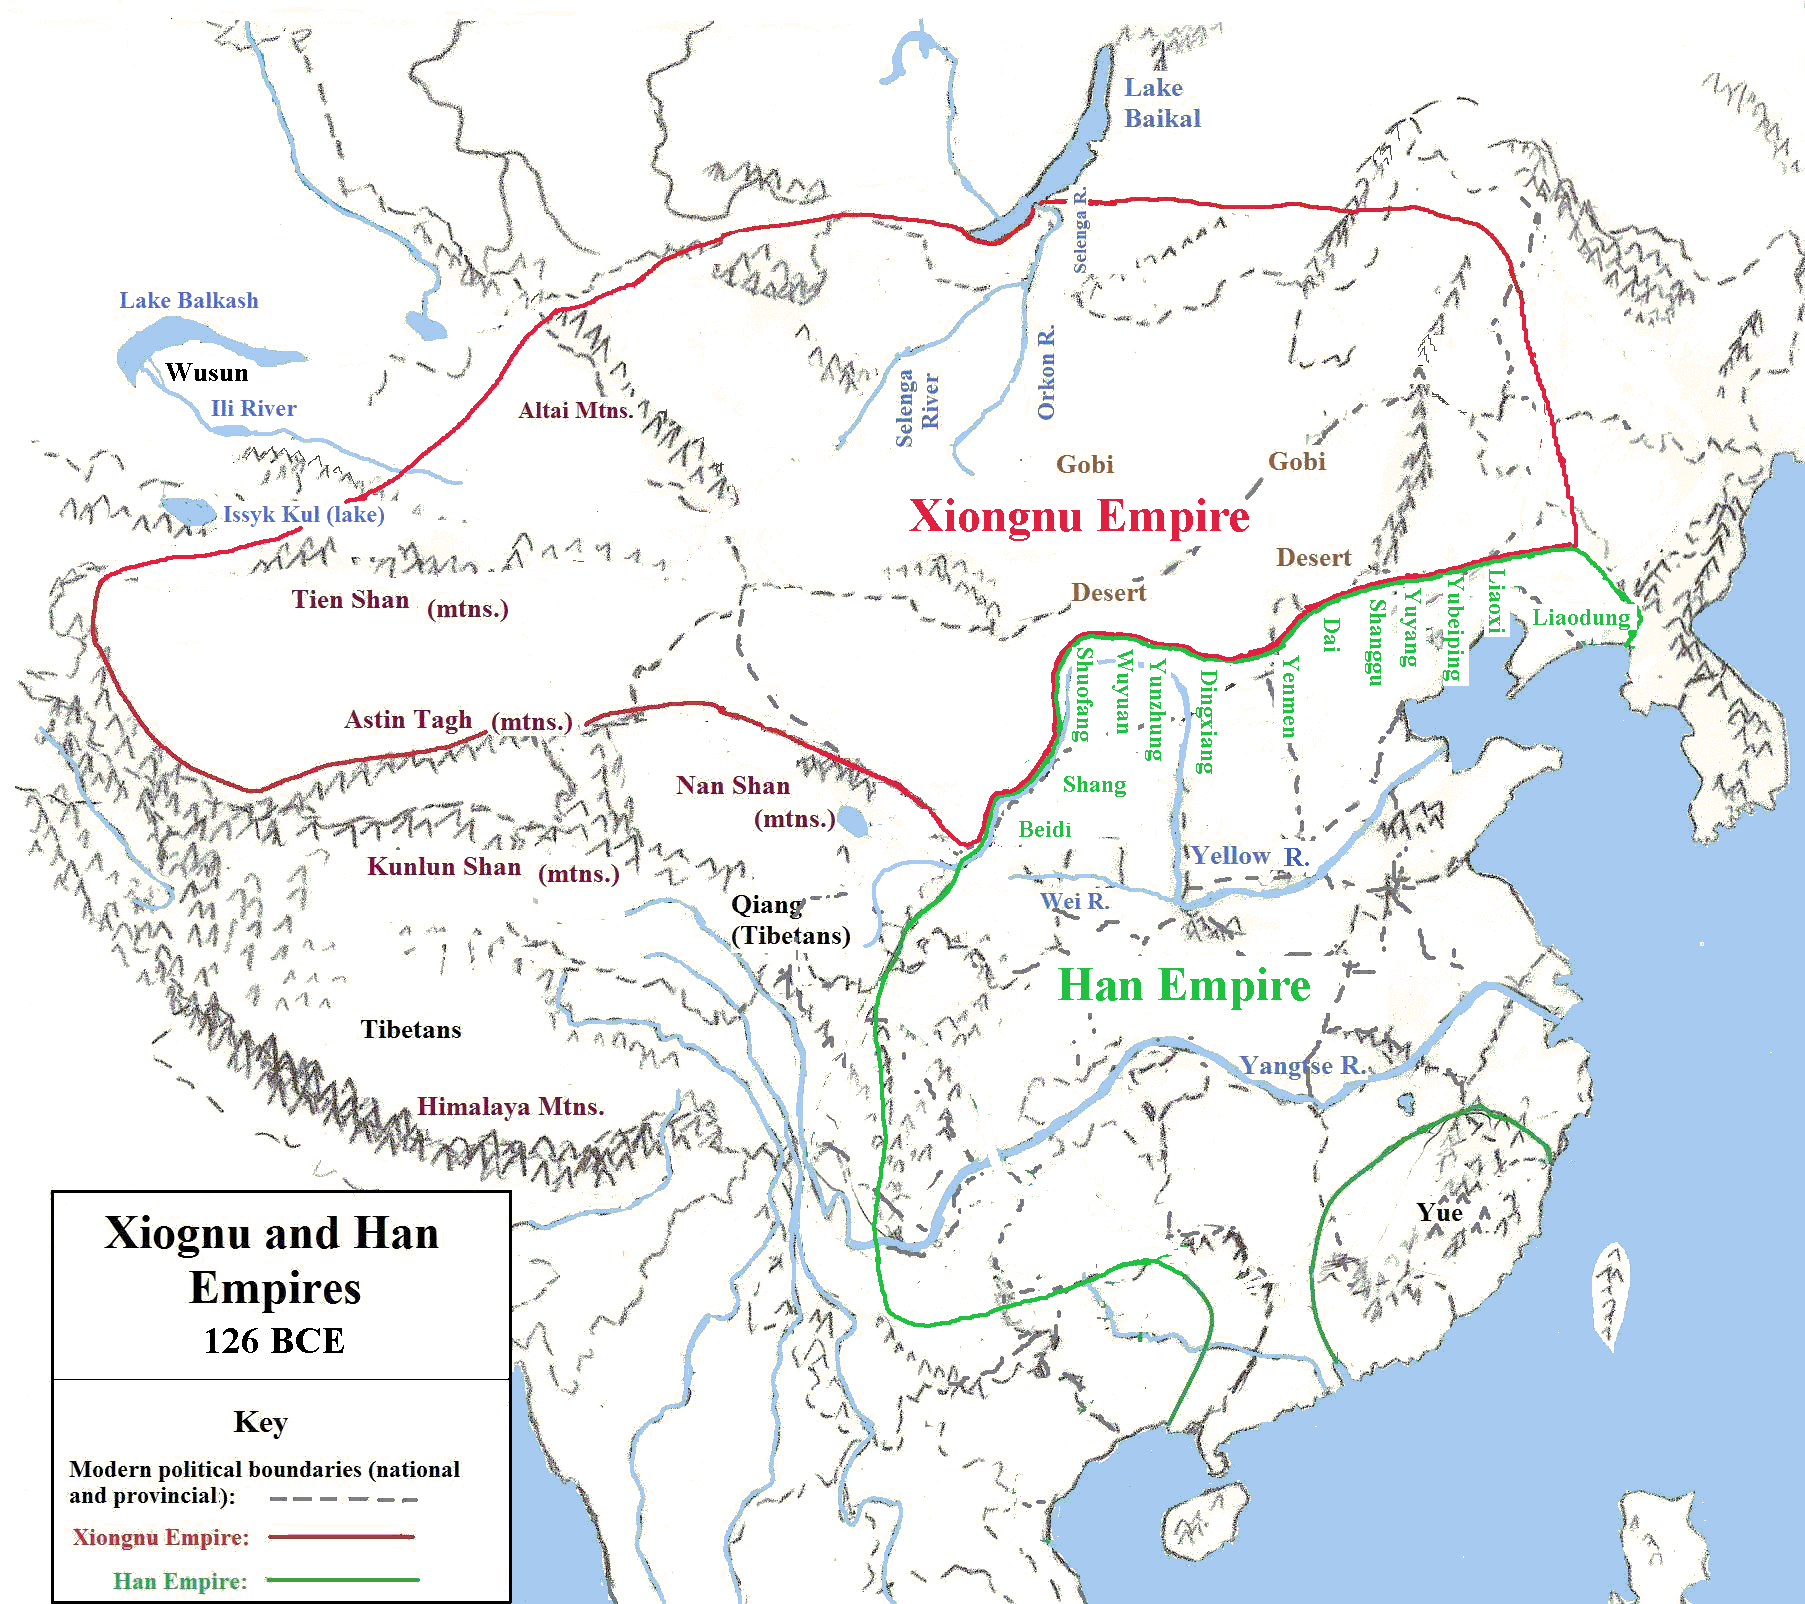 Xiongnu and Han Empires in 126 BCE